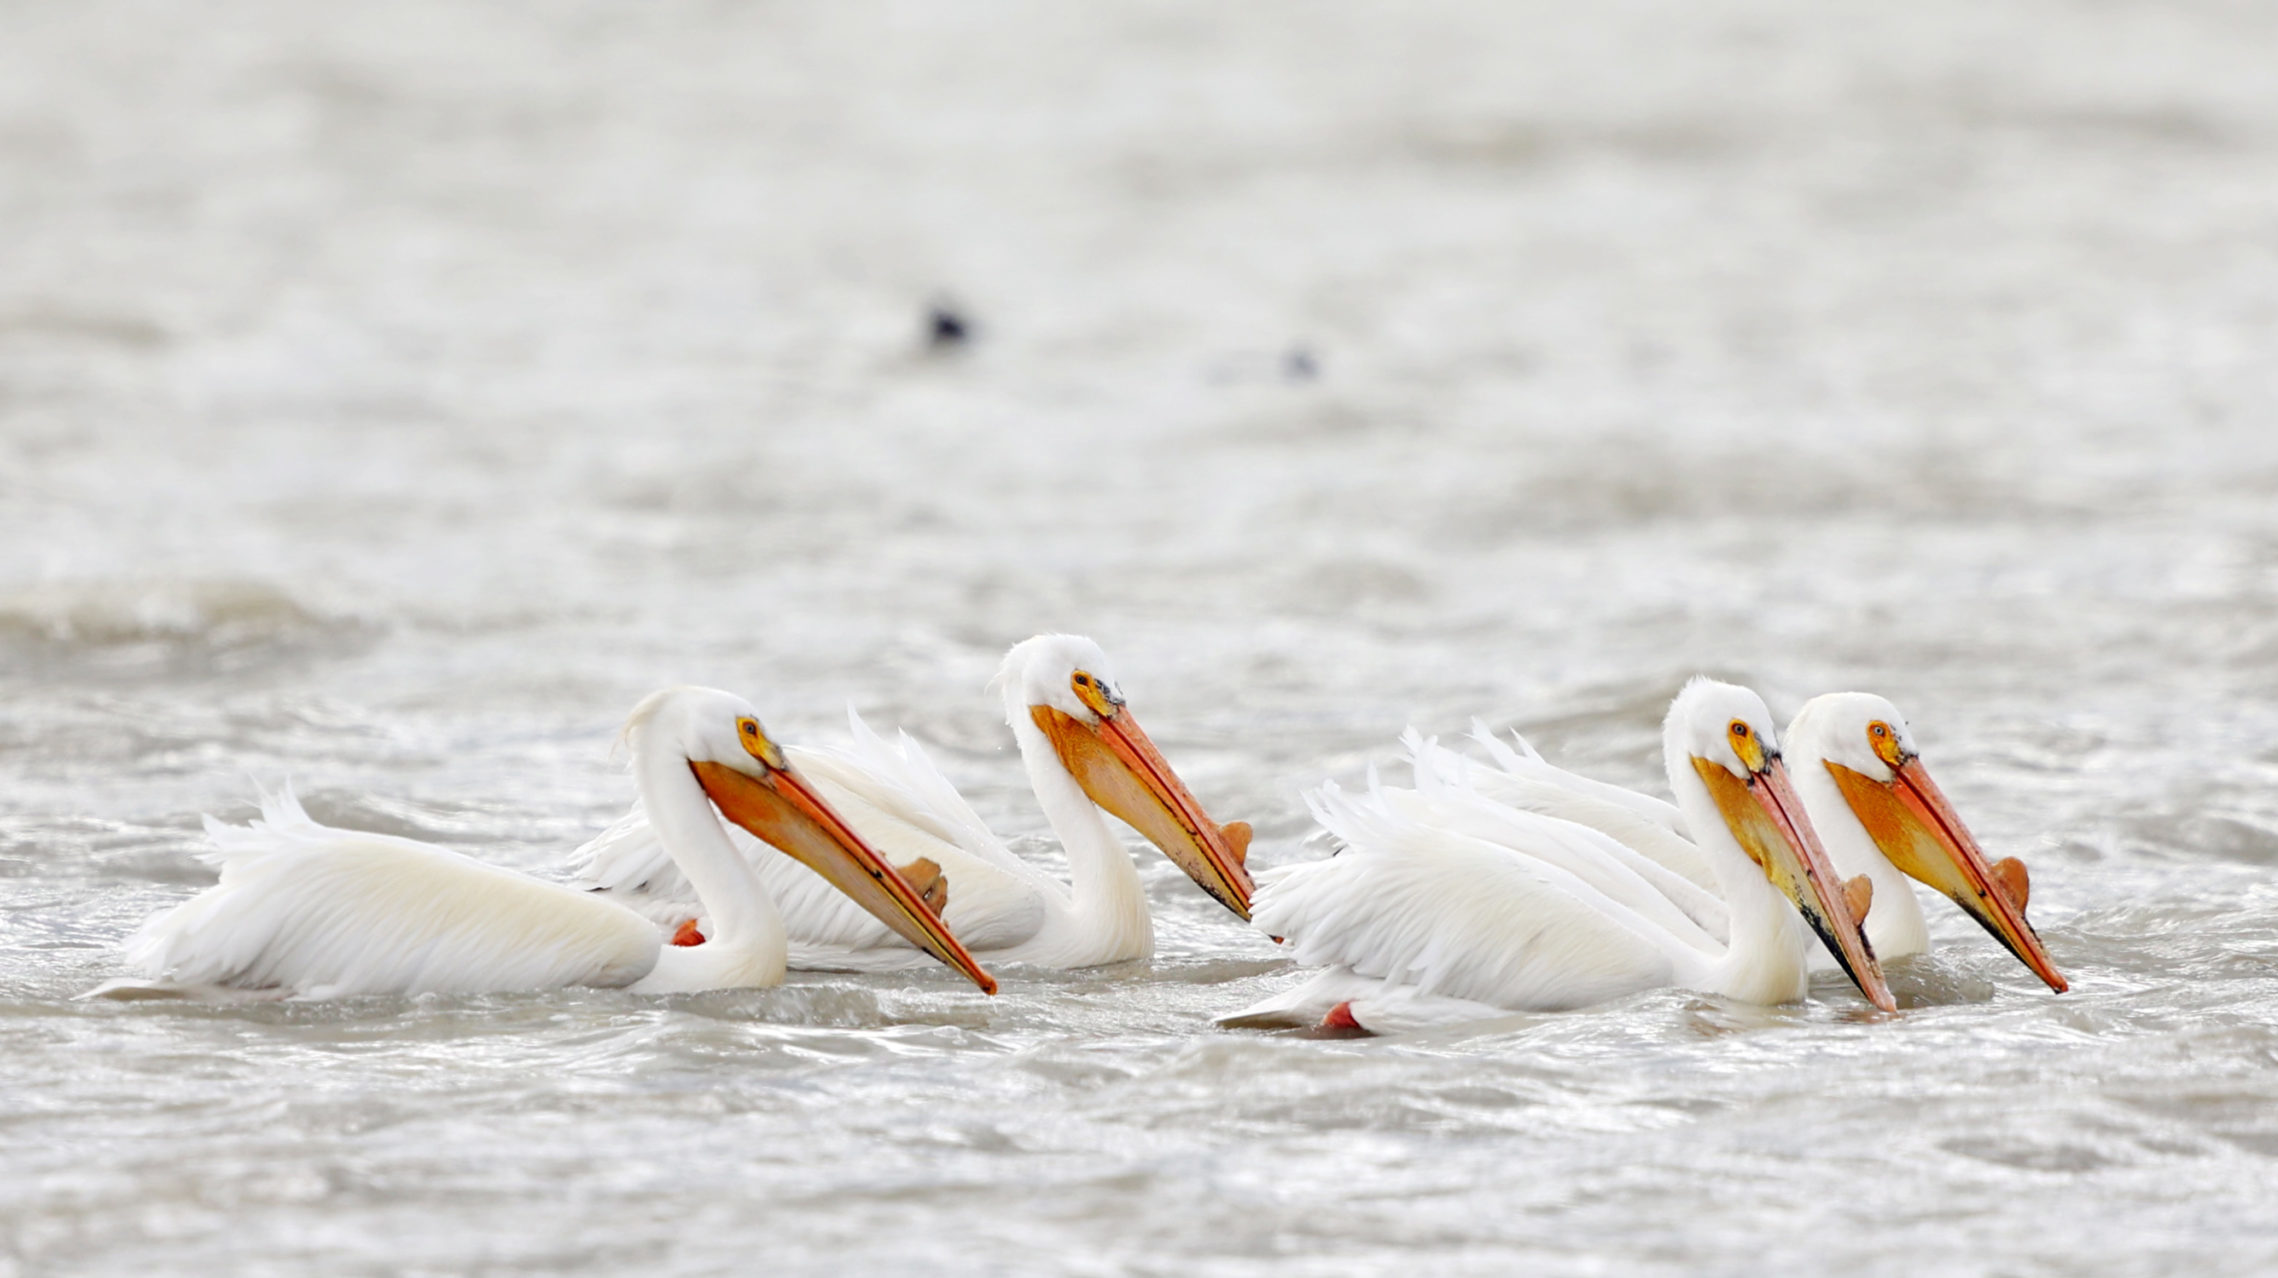 Group of pelicans on the water. Bird flu was found in pelicans....